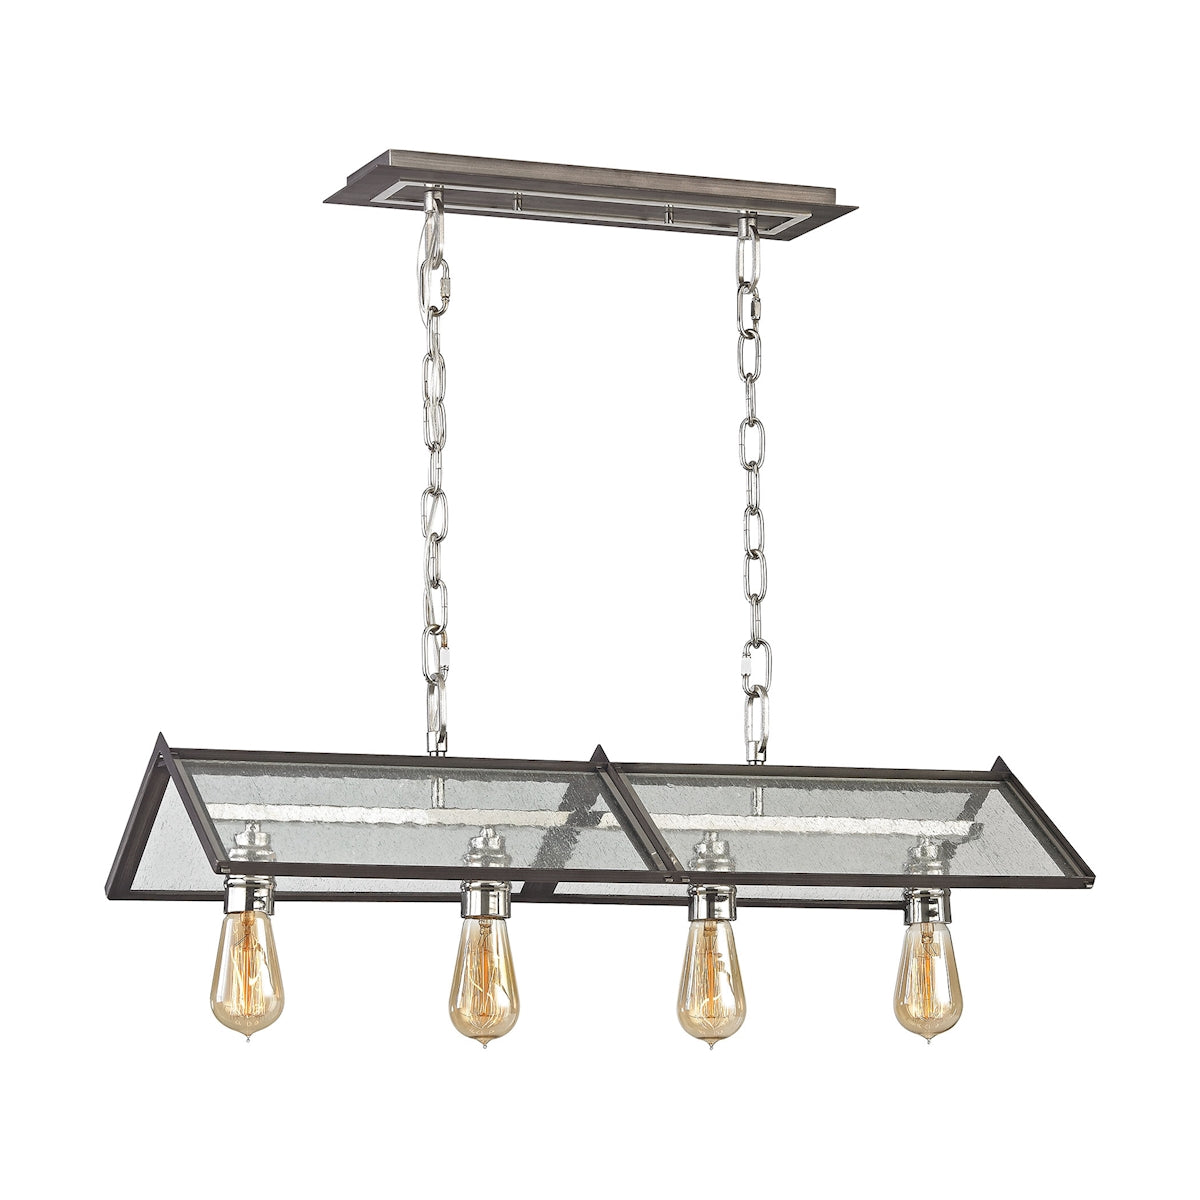 ELK Lighting 31962/4 Ridgeview 4-Light Chandelier in Polished Nickel and Weathered Zinc with Seedy Glass